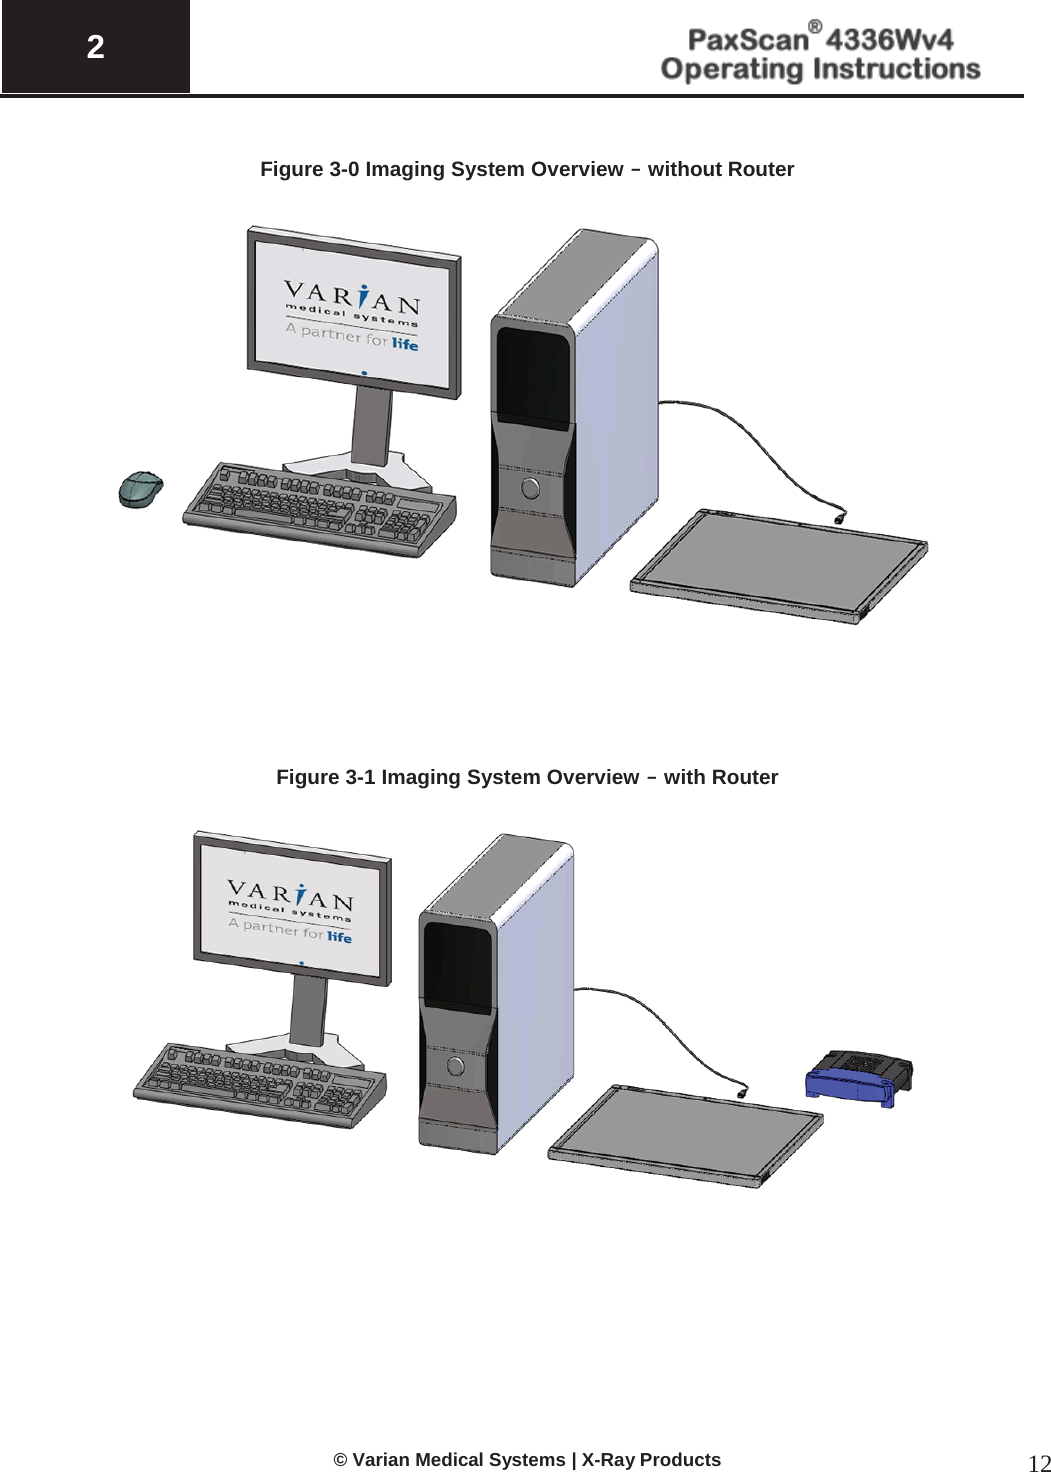  2   © Varian Medical Systems | X-Ray Products 12  Figure 3-0 Imaging System Overview - without Router      Figure 3-1 Imaging System Overview - with Router          